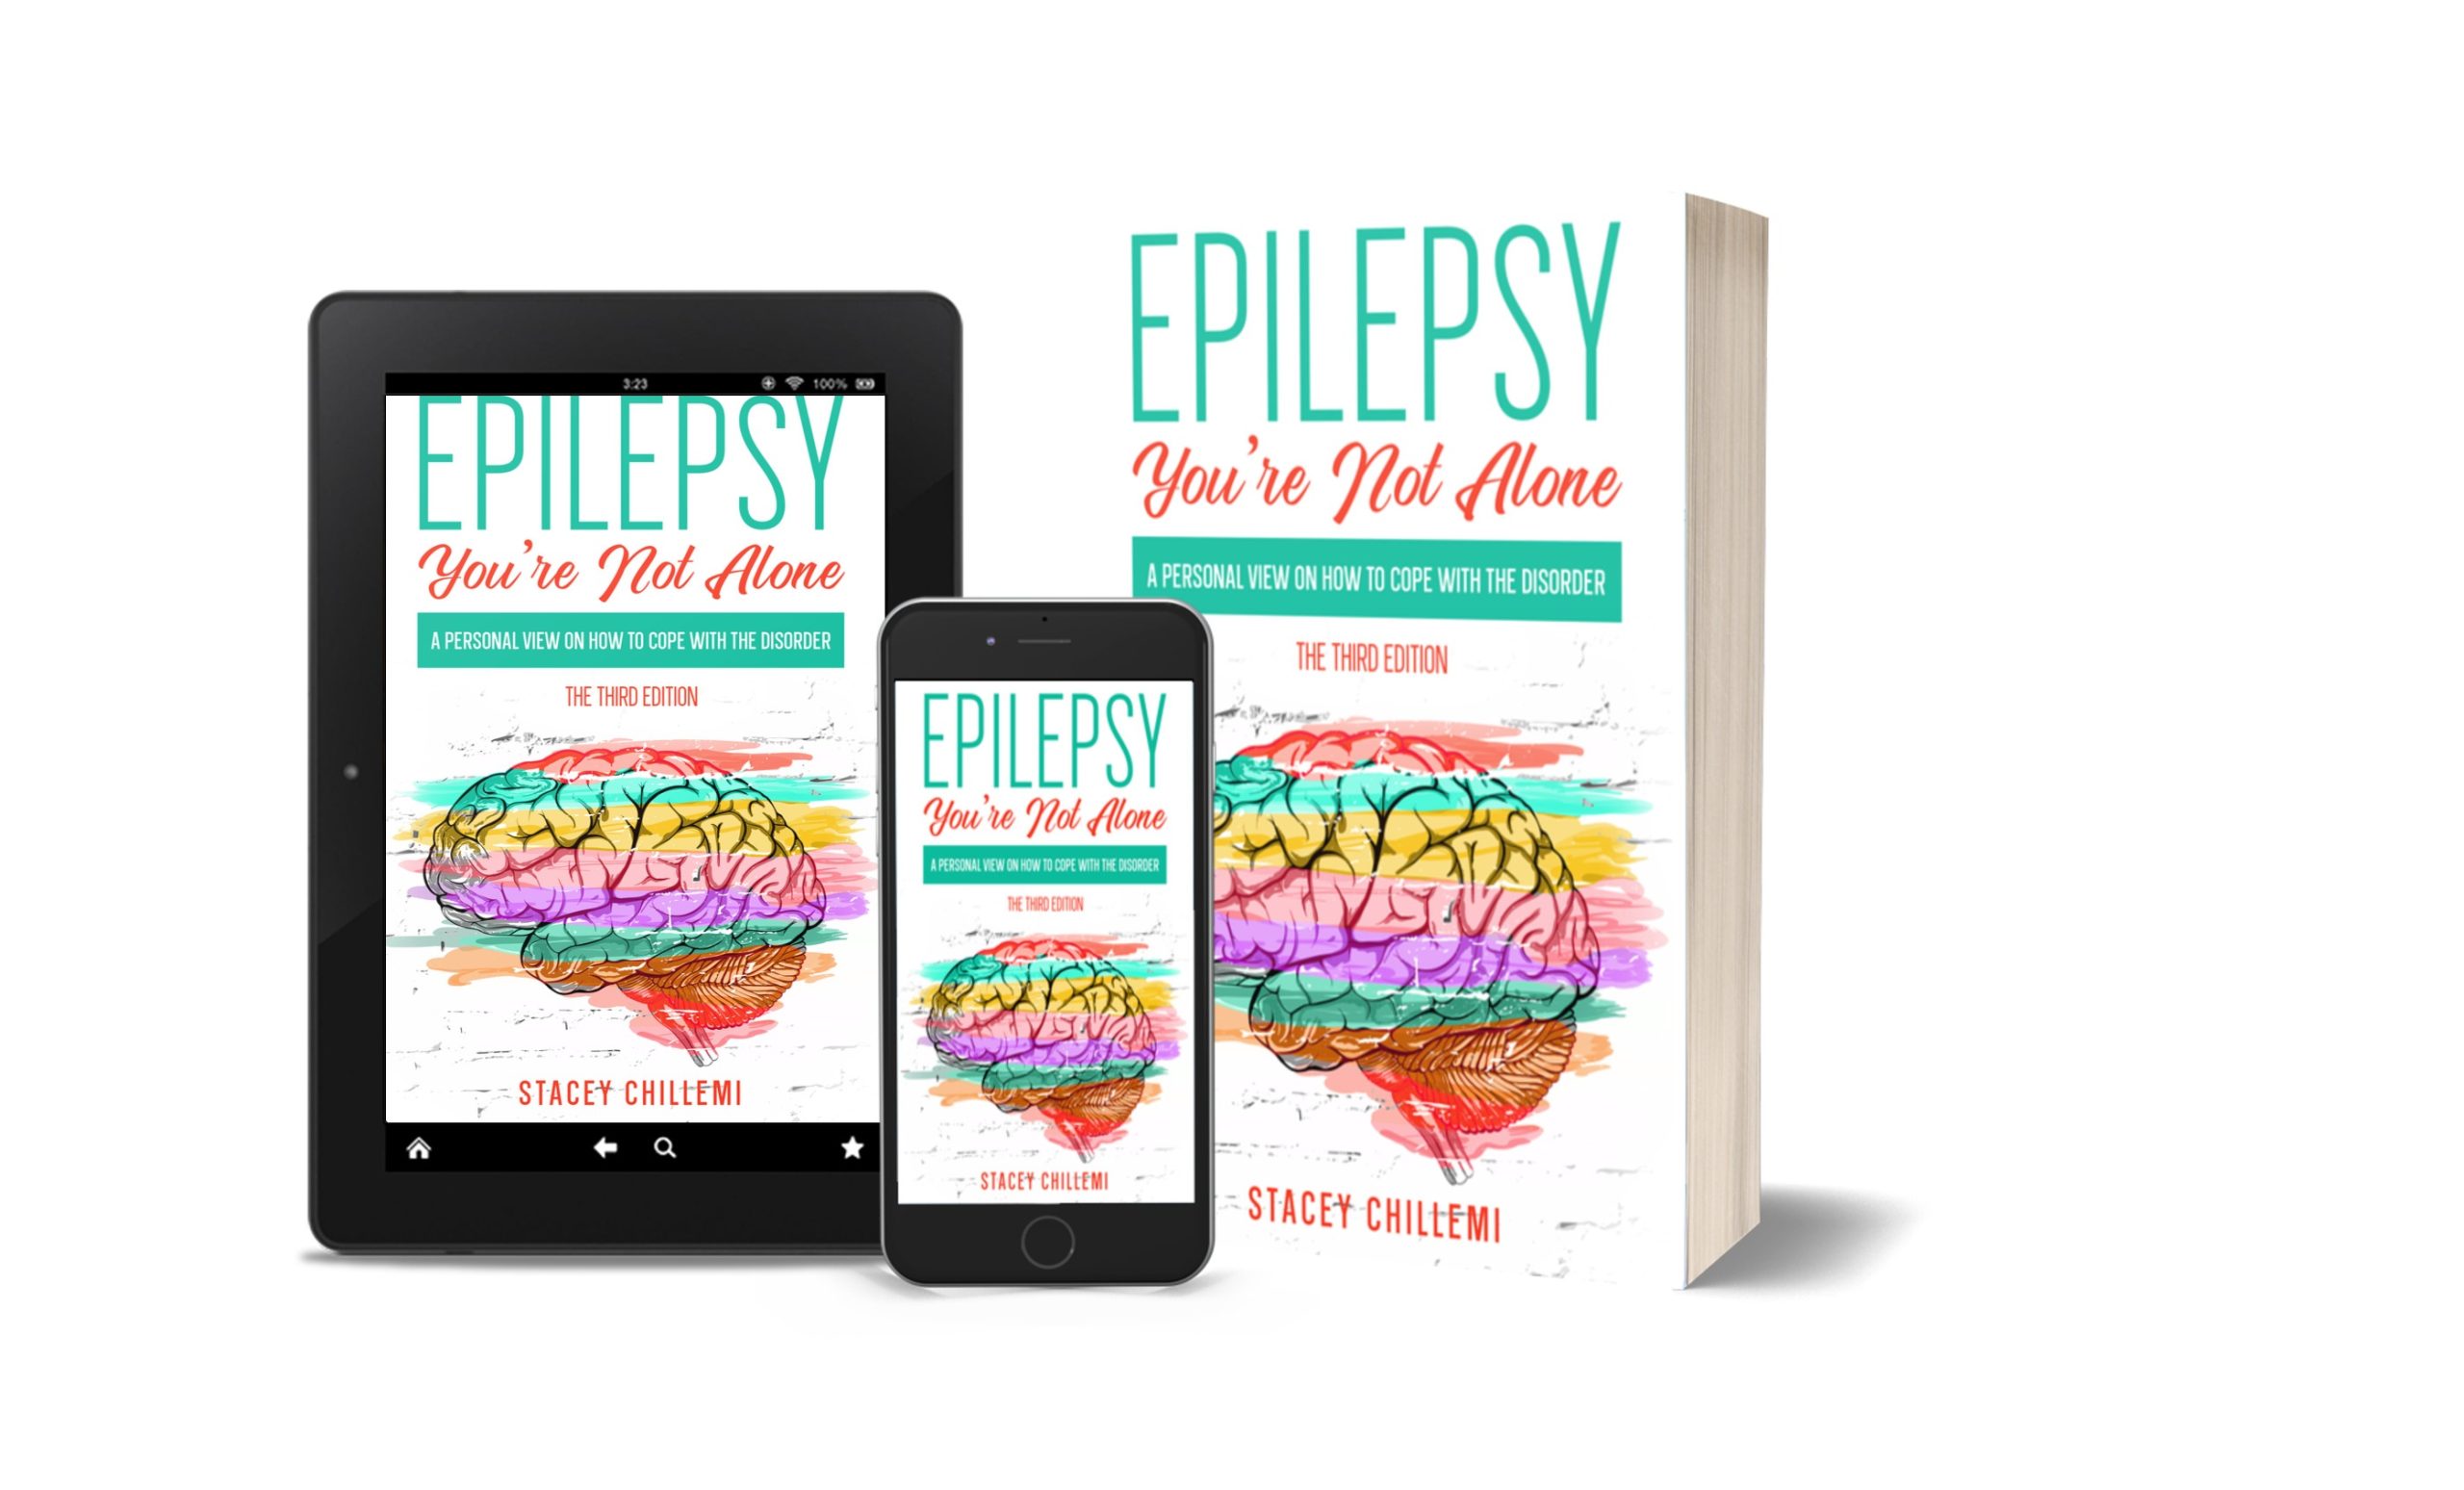 My New Book Epilepsy You’re Not Alone Is The #1 Best Seller on Amazon!